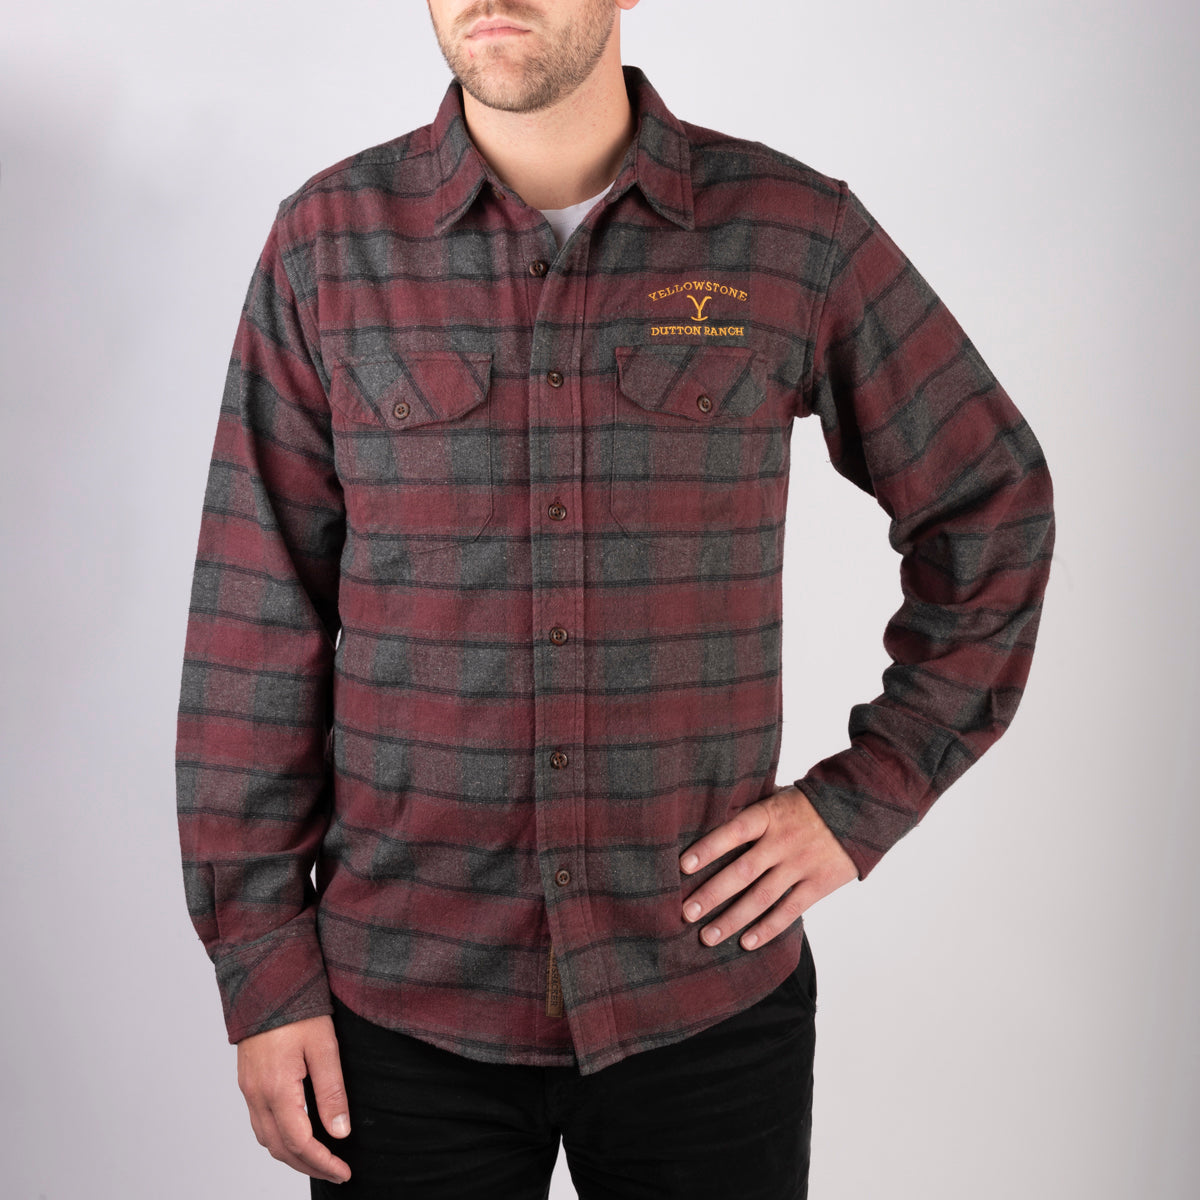 Yellowstone Dutton Ranch South Fork Embroidered Grindle Shirt